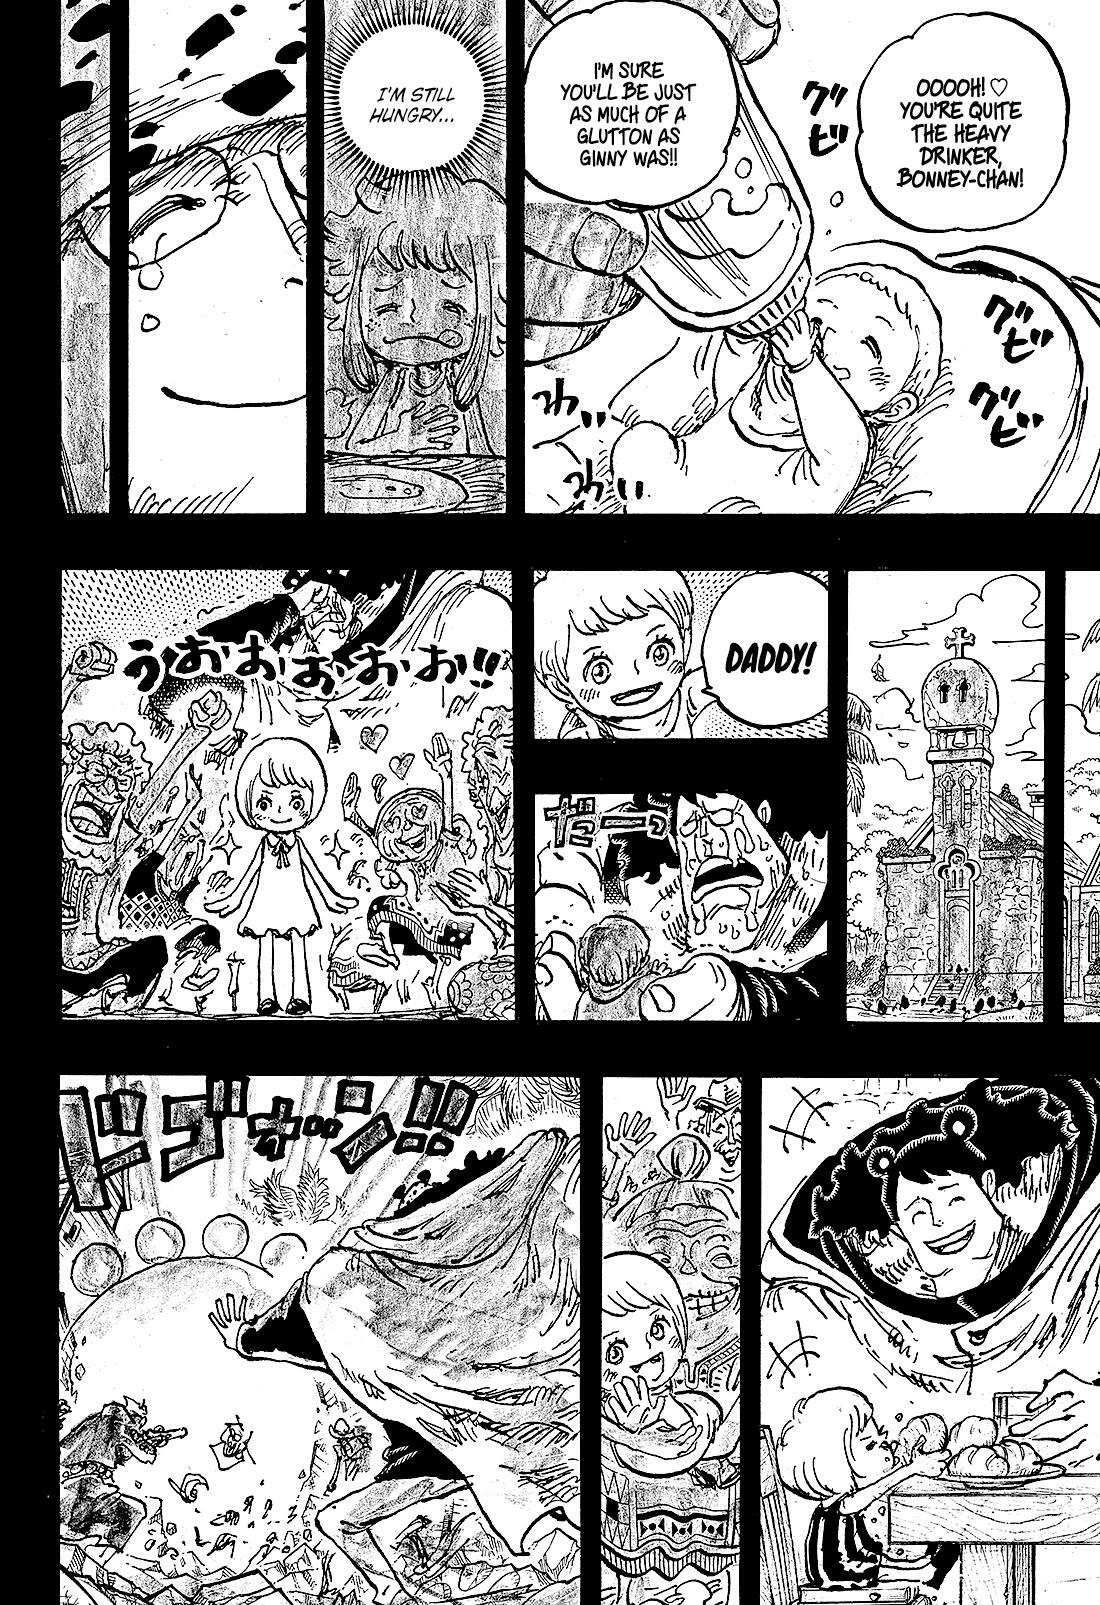 1057] Difficulty translating 'Nakama' in the scans is part of why